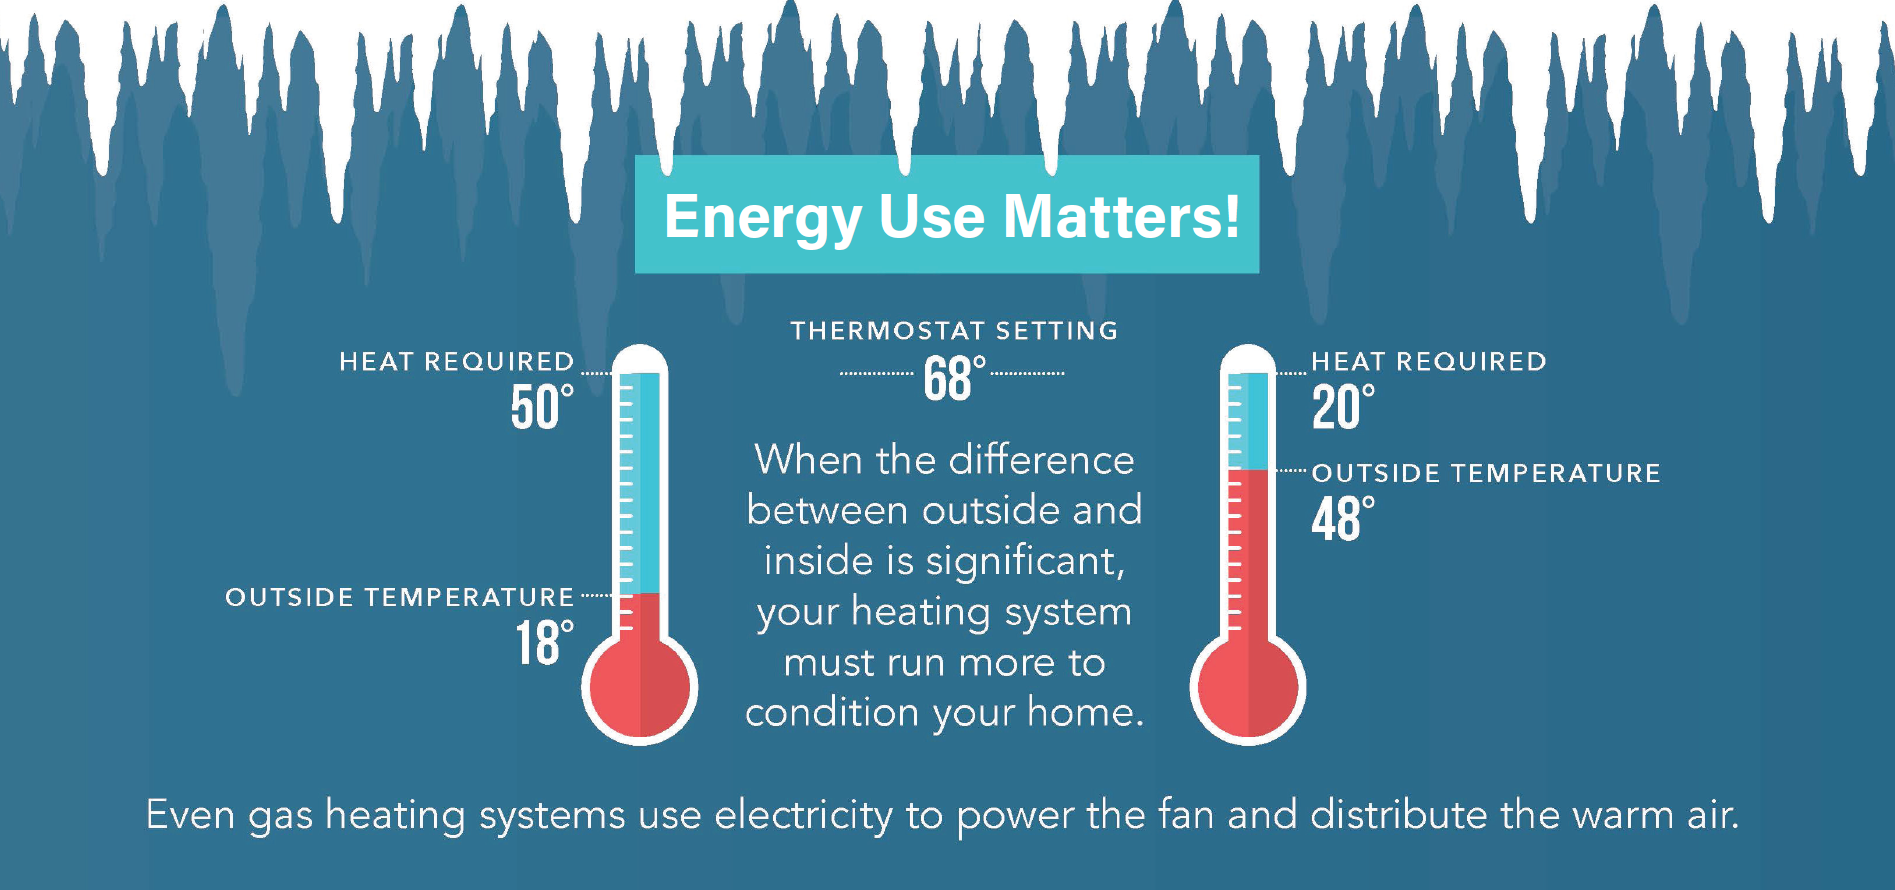 Thermostat settings make a difference in energy use